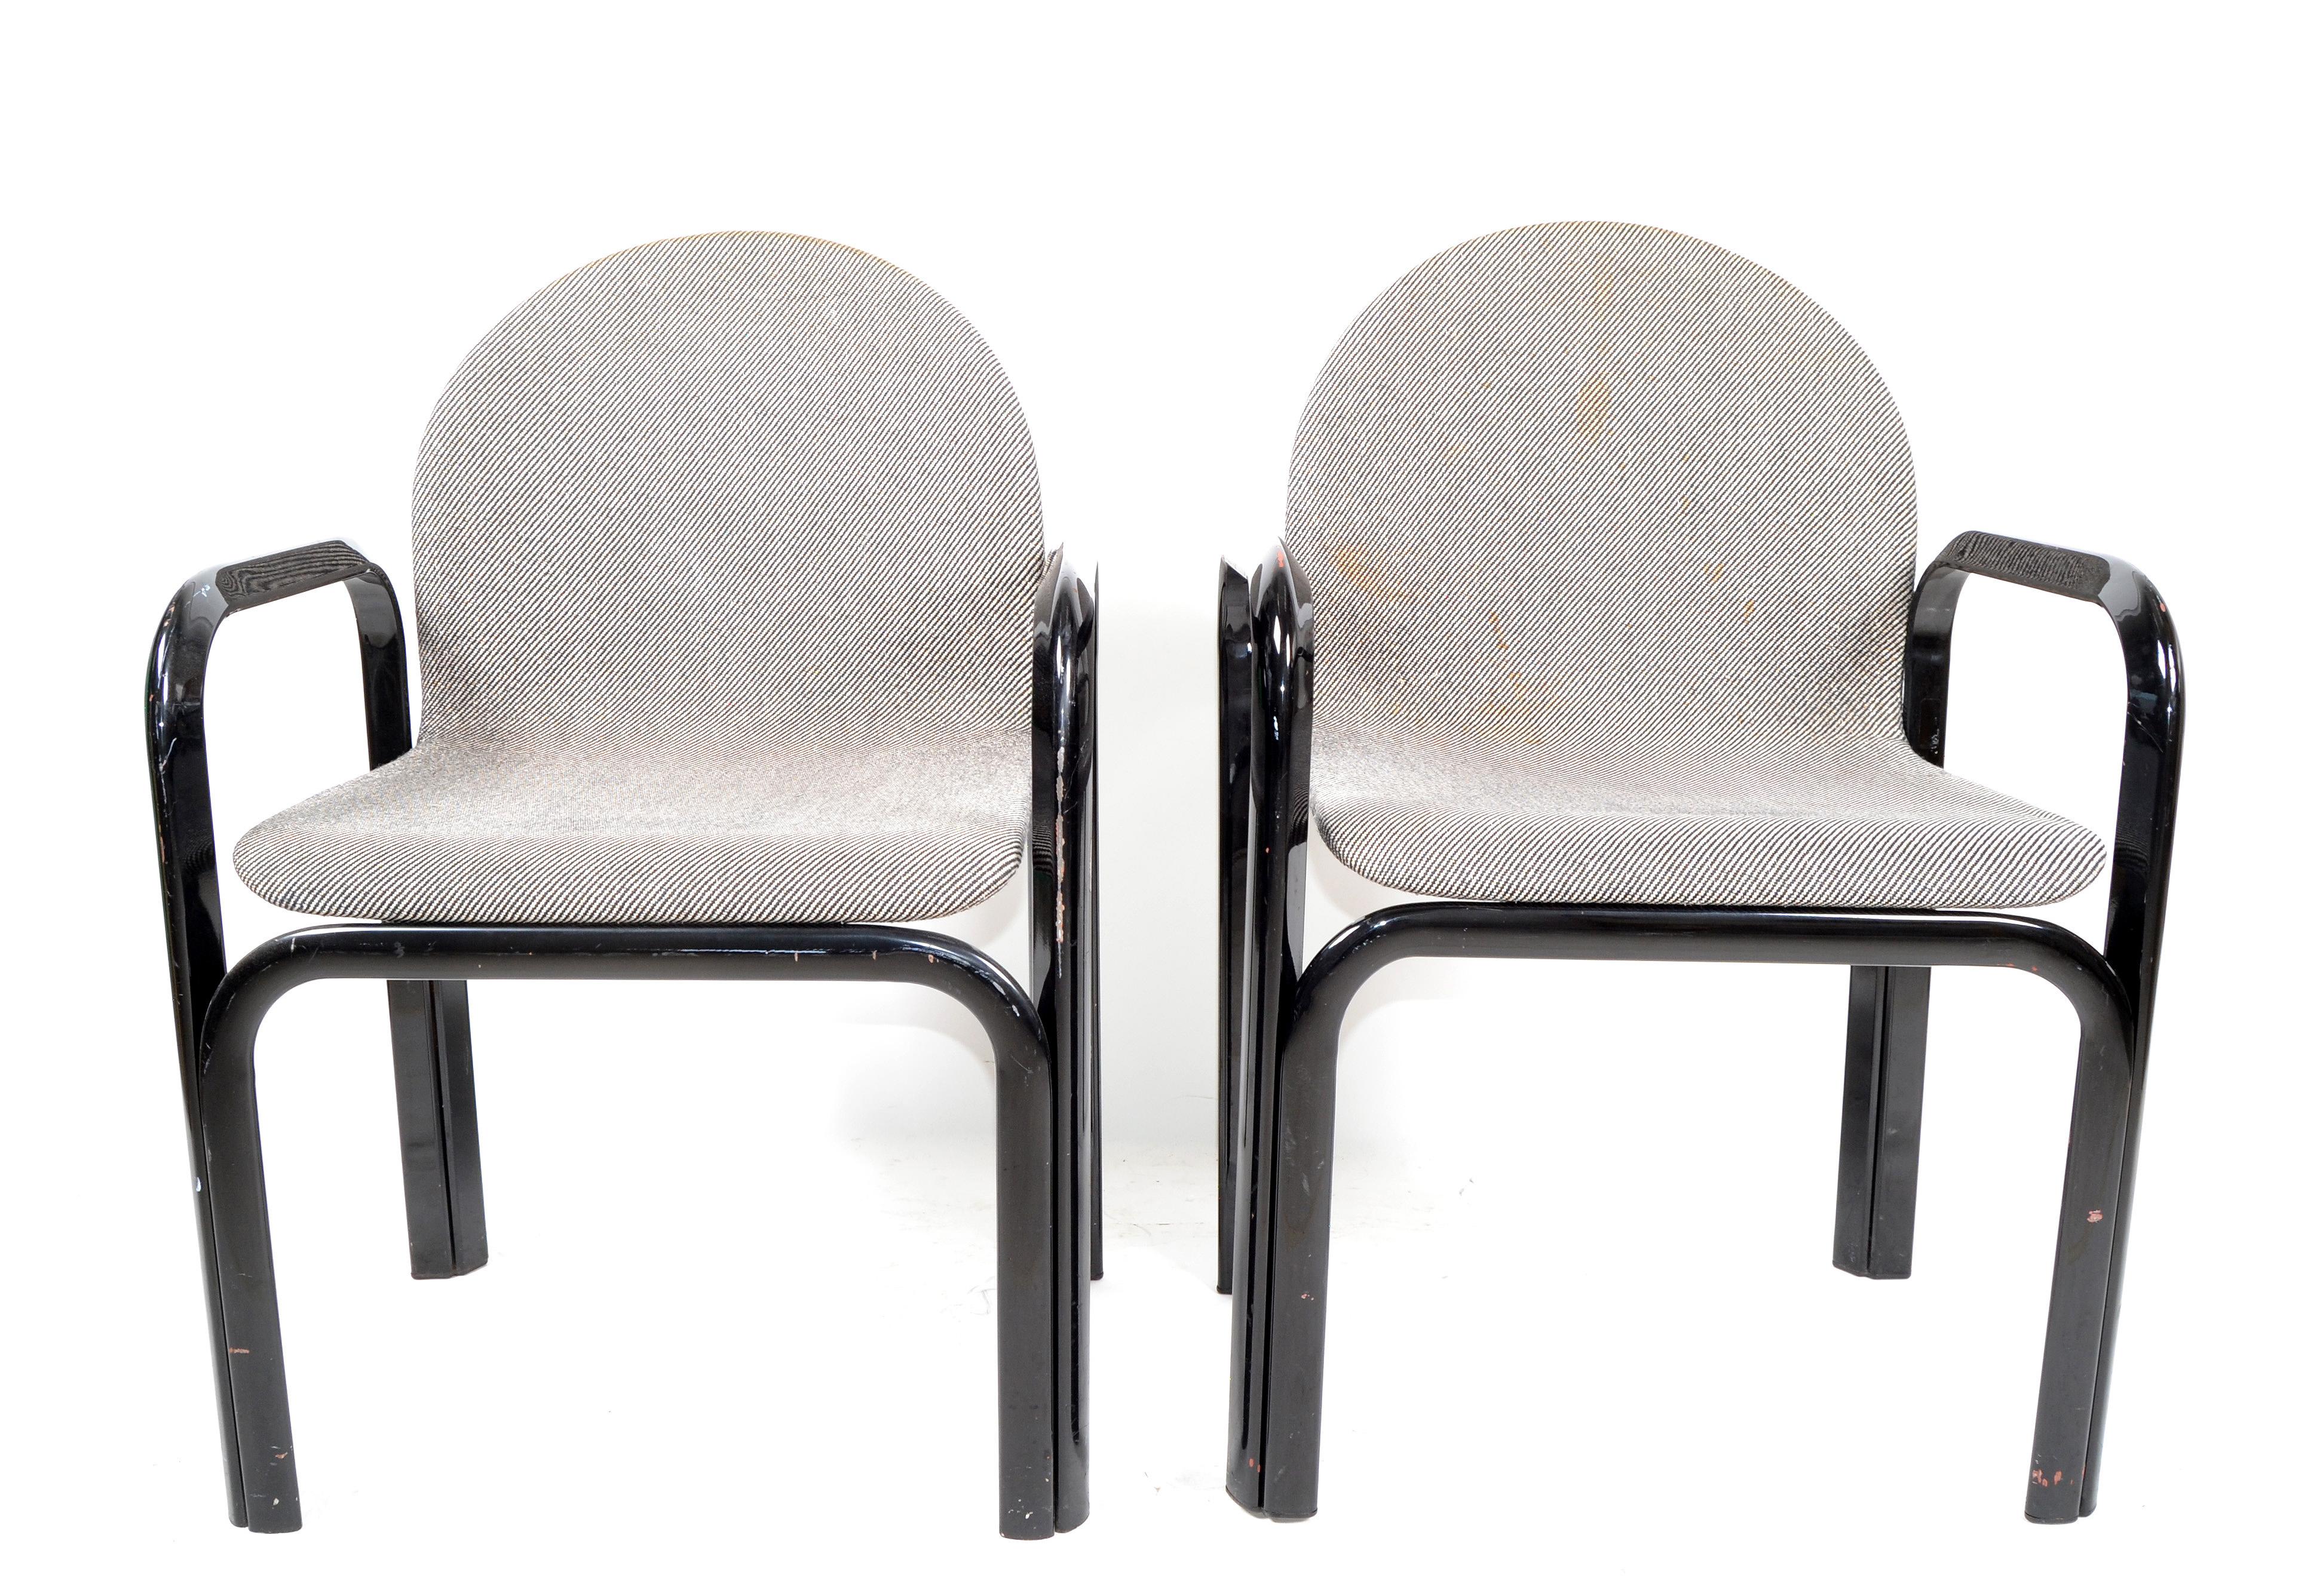 Pair of armchairs or conference chairs by Gae Aulenti for Knoll International. We have 5 sets available.
The frames of the chairs are constructed by sculpted metal tubes, sinuous bent plywood seats with its original fabric upholstery.
Knoll Mark and